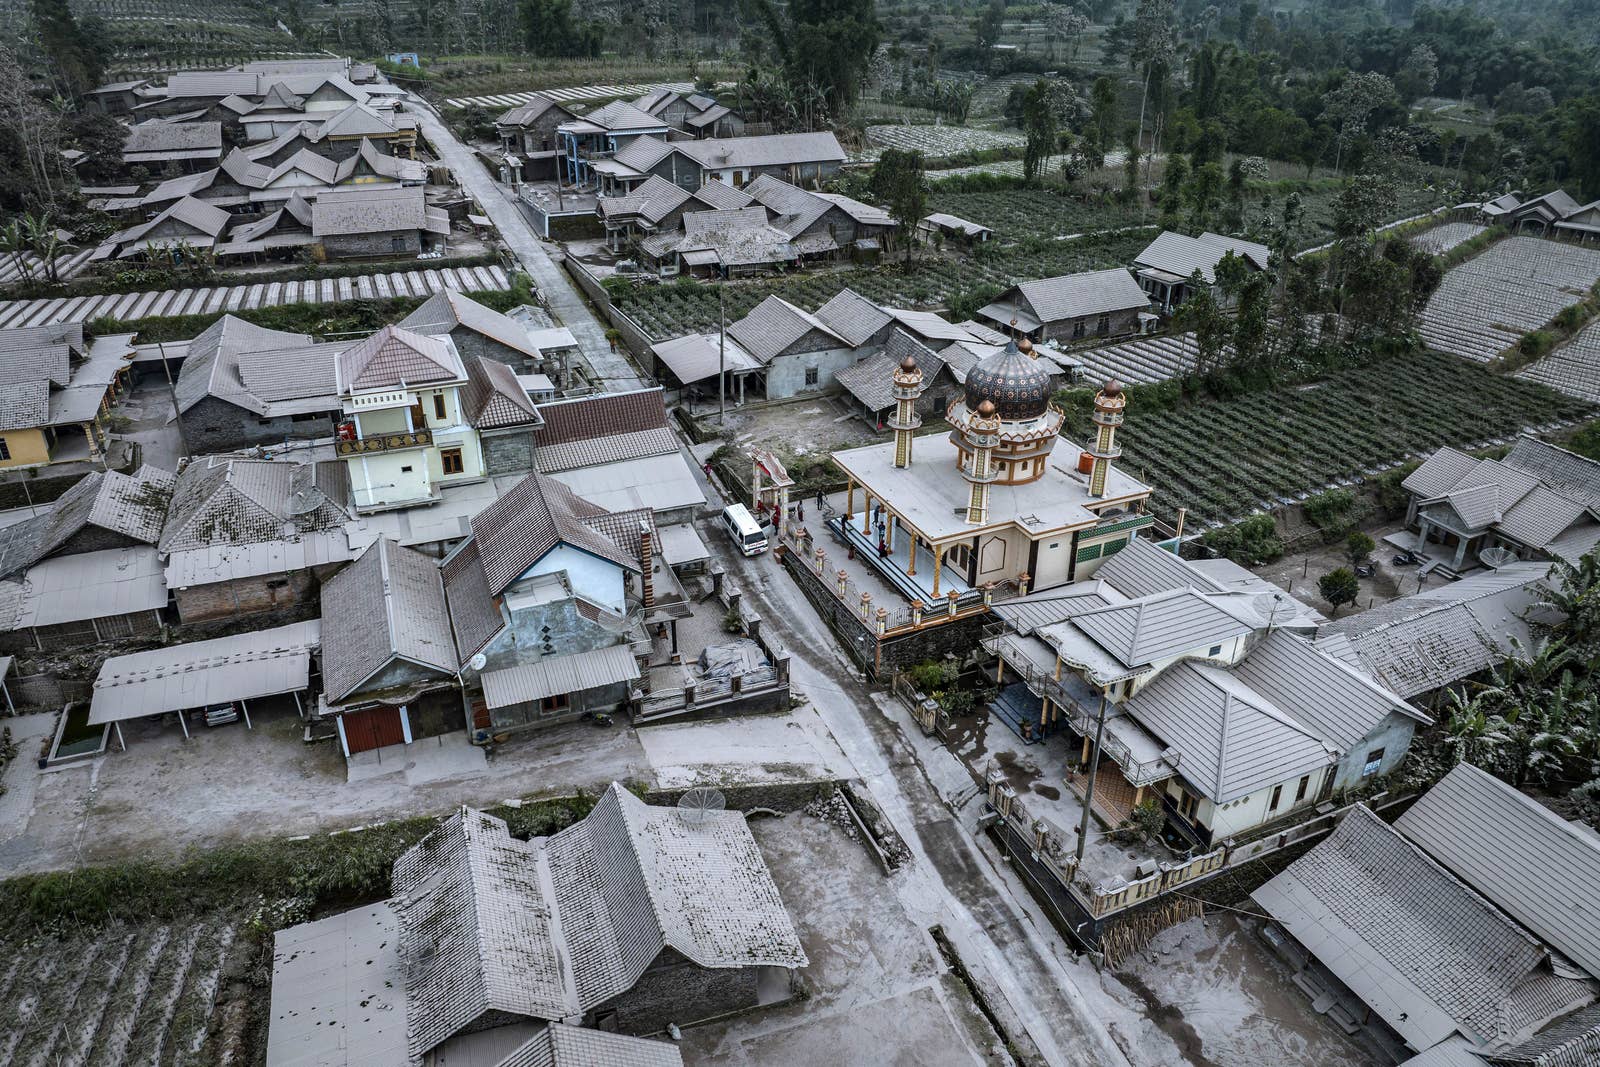 an aerial view of a  village with one to two story houses, a colorful mosque, and fields of crops covered in white ash